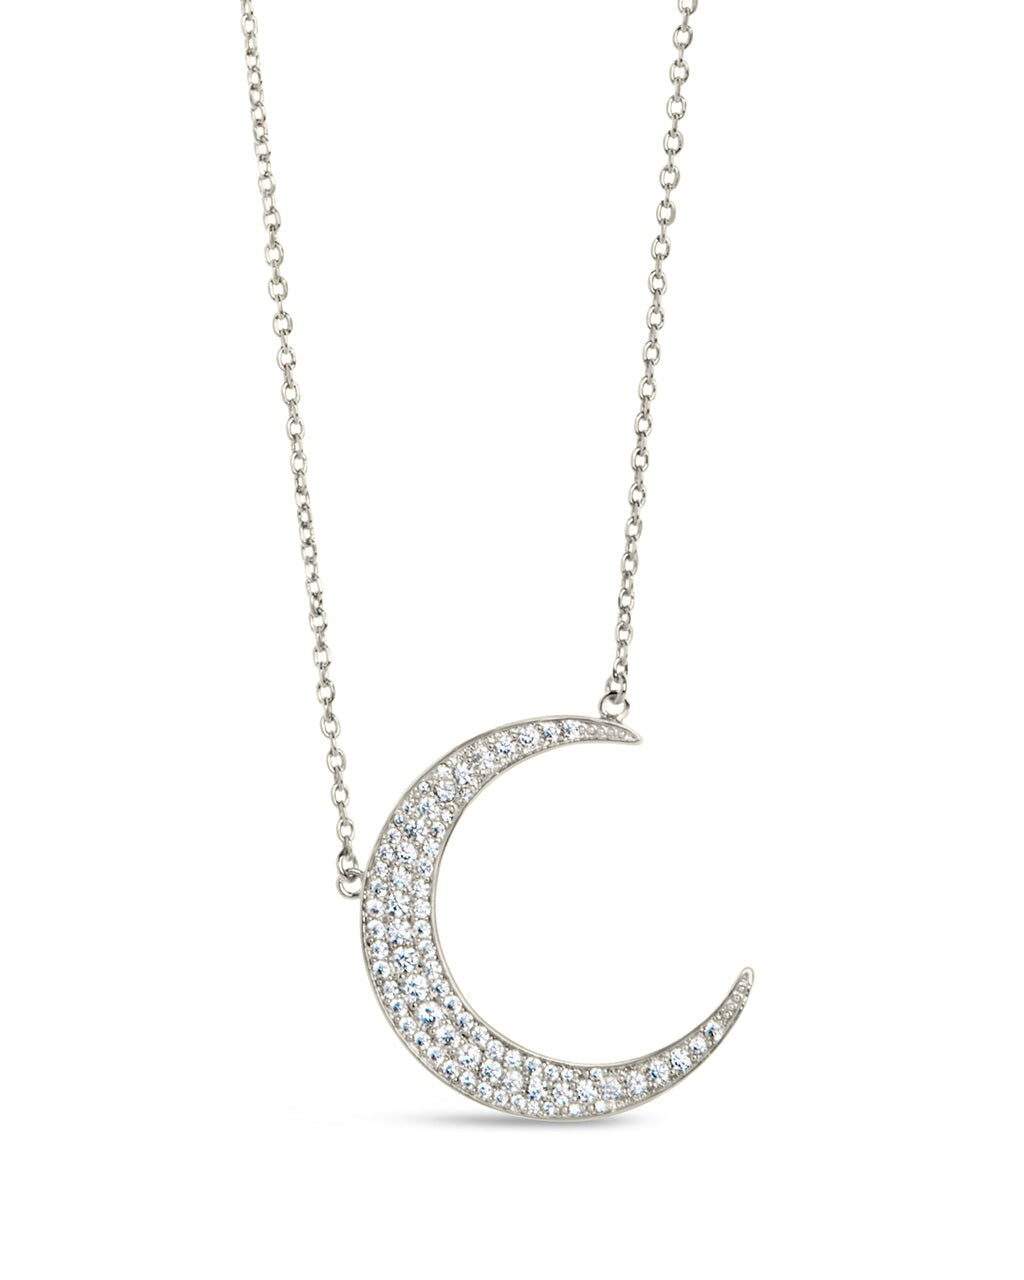 Stationed CZ Crescent Necklace Necklace Sterling Forever Silver 